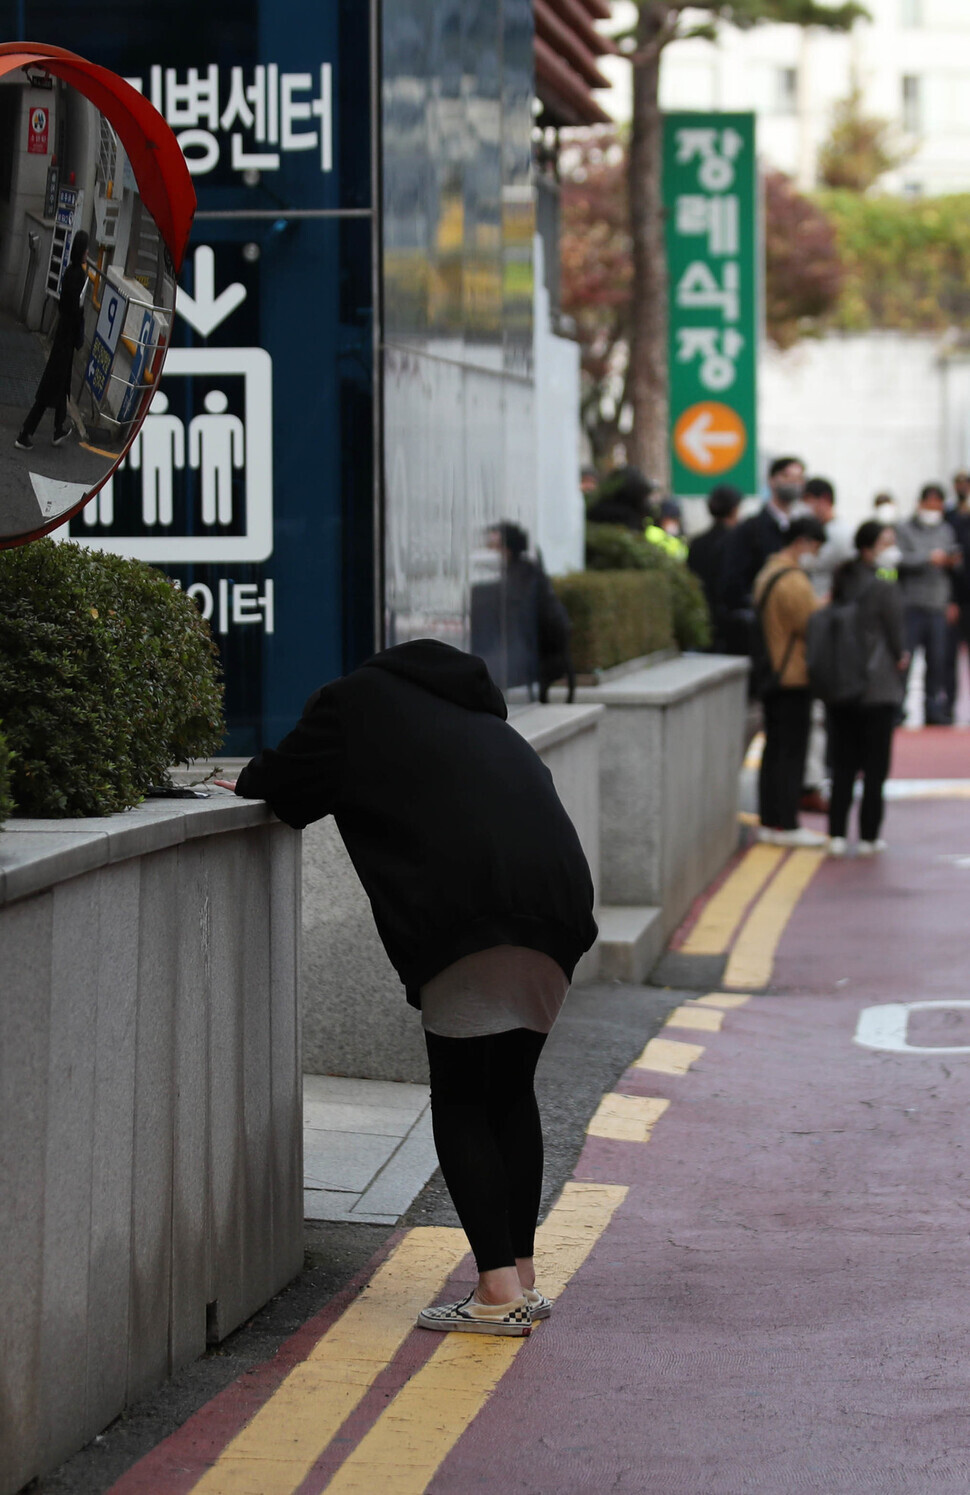 A woman headed to the funeral hall at Soonchunhyang University Hospital in Seoul’s Yongsan District in search of her missing child pauses, overcome by emotion, to cry. (Baek So-ah/The Hankyoreh)